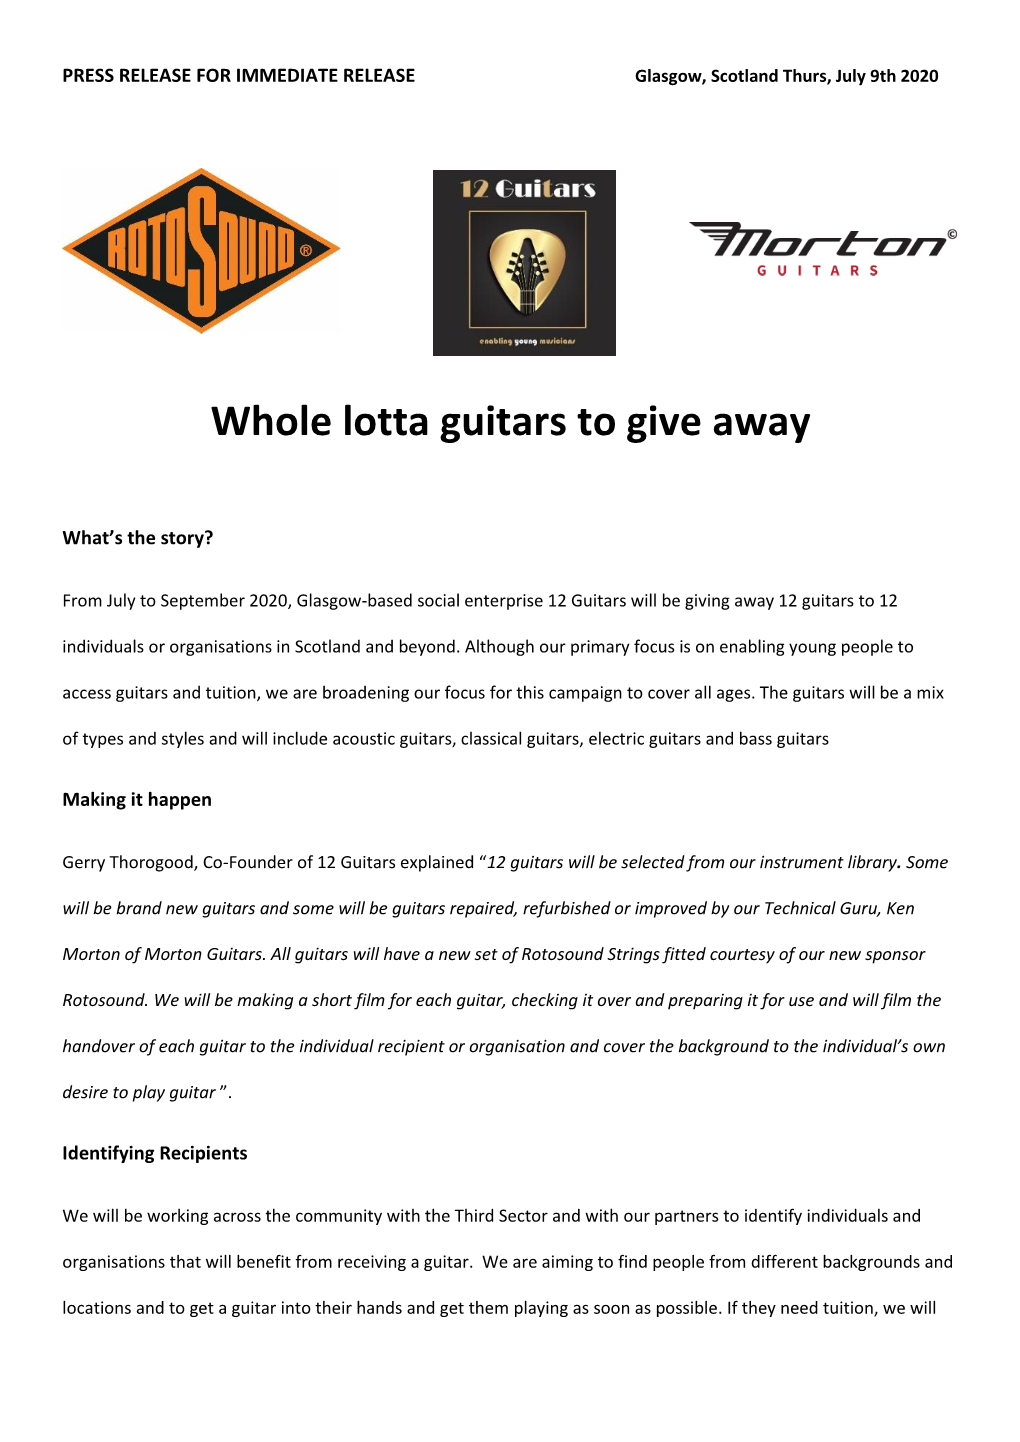 Whole Lotta Guitars to Give Away